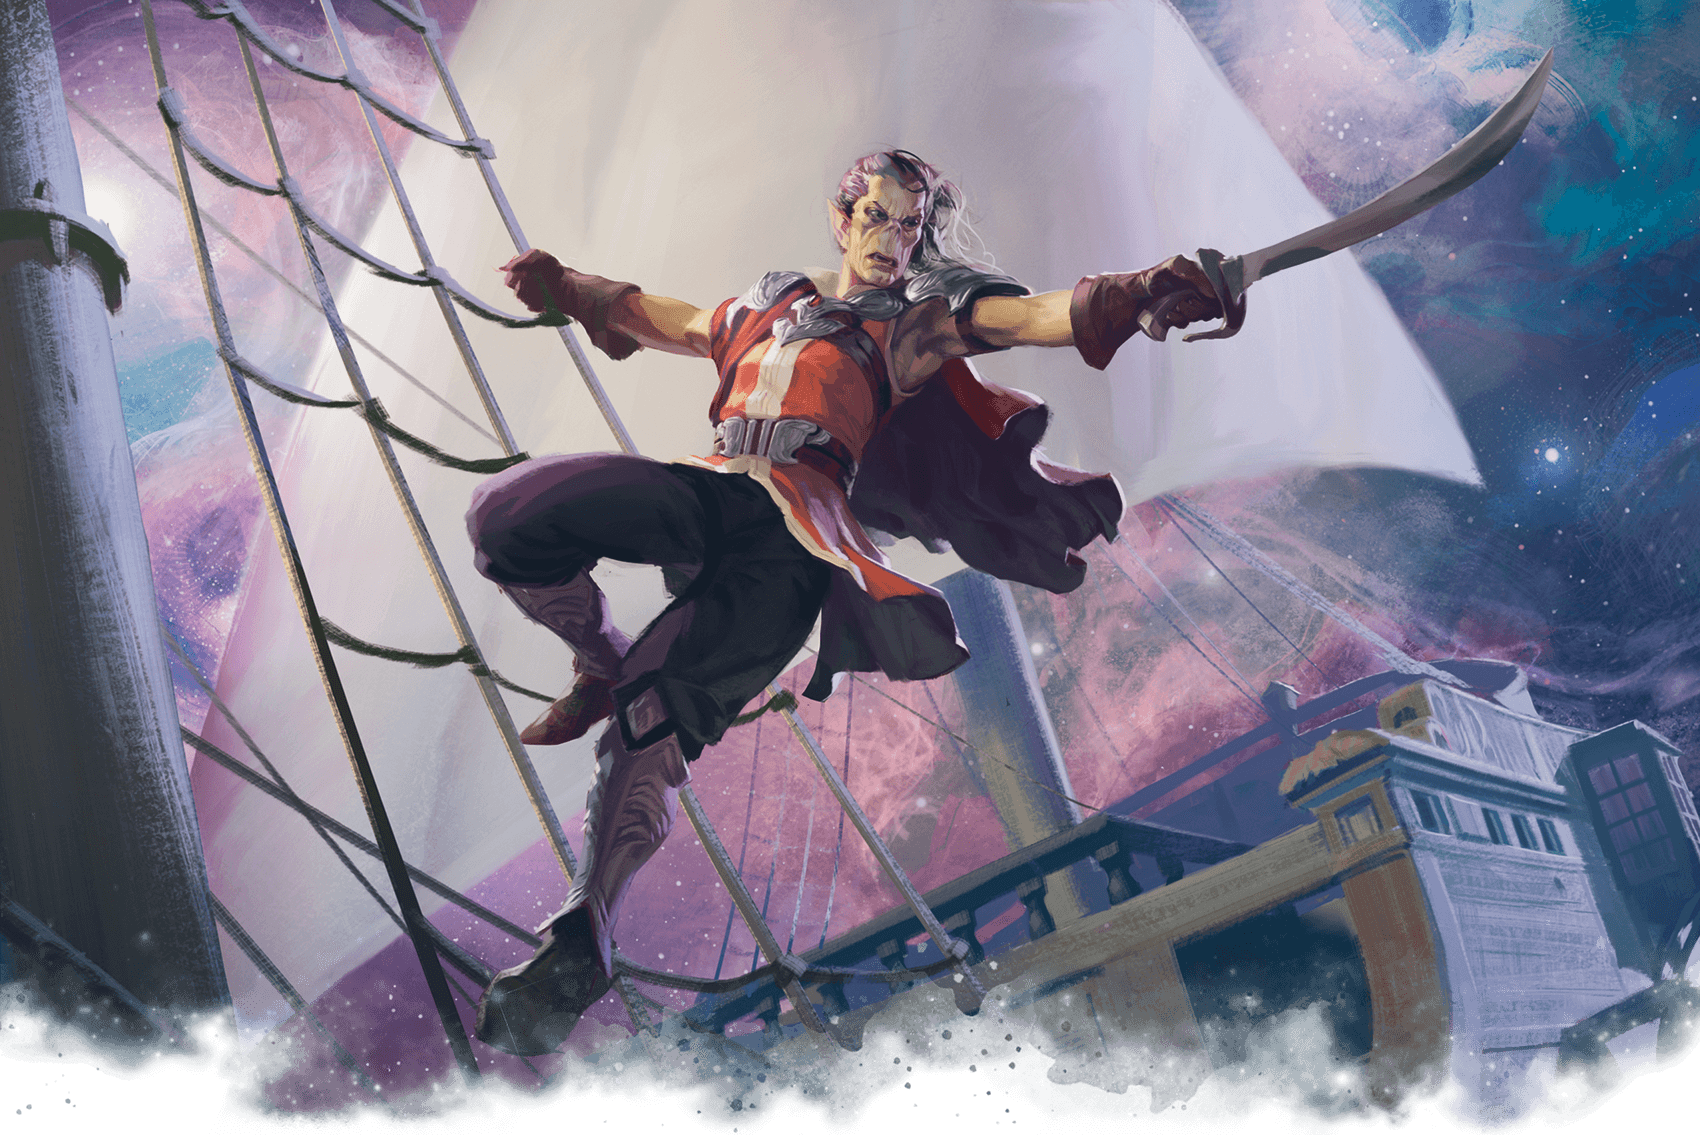 Picture of a Githyanki on the ropes of a ship brandishing a cutlass